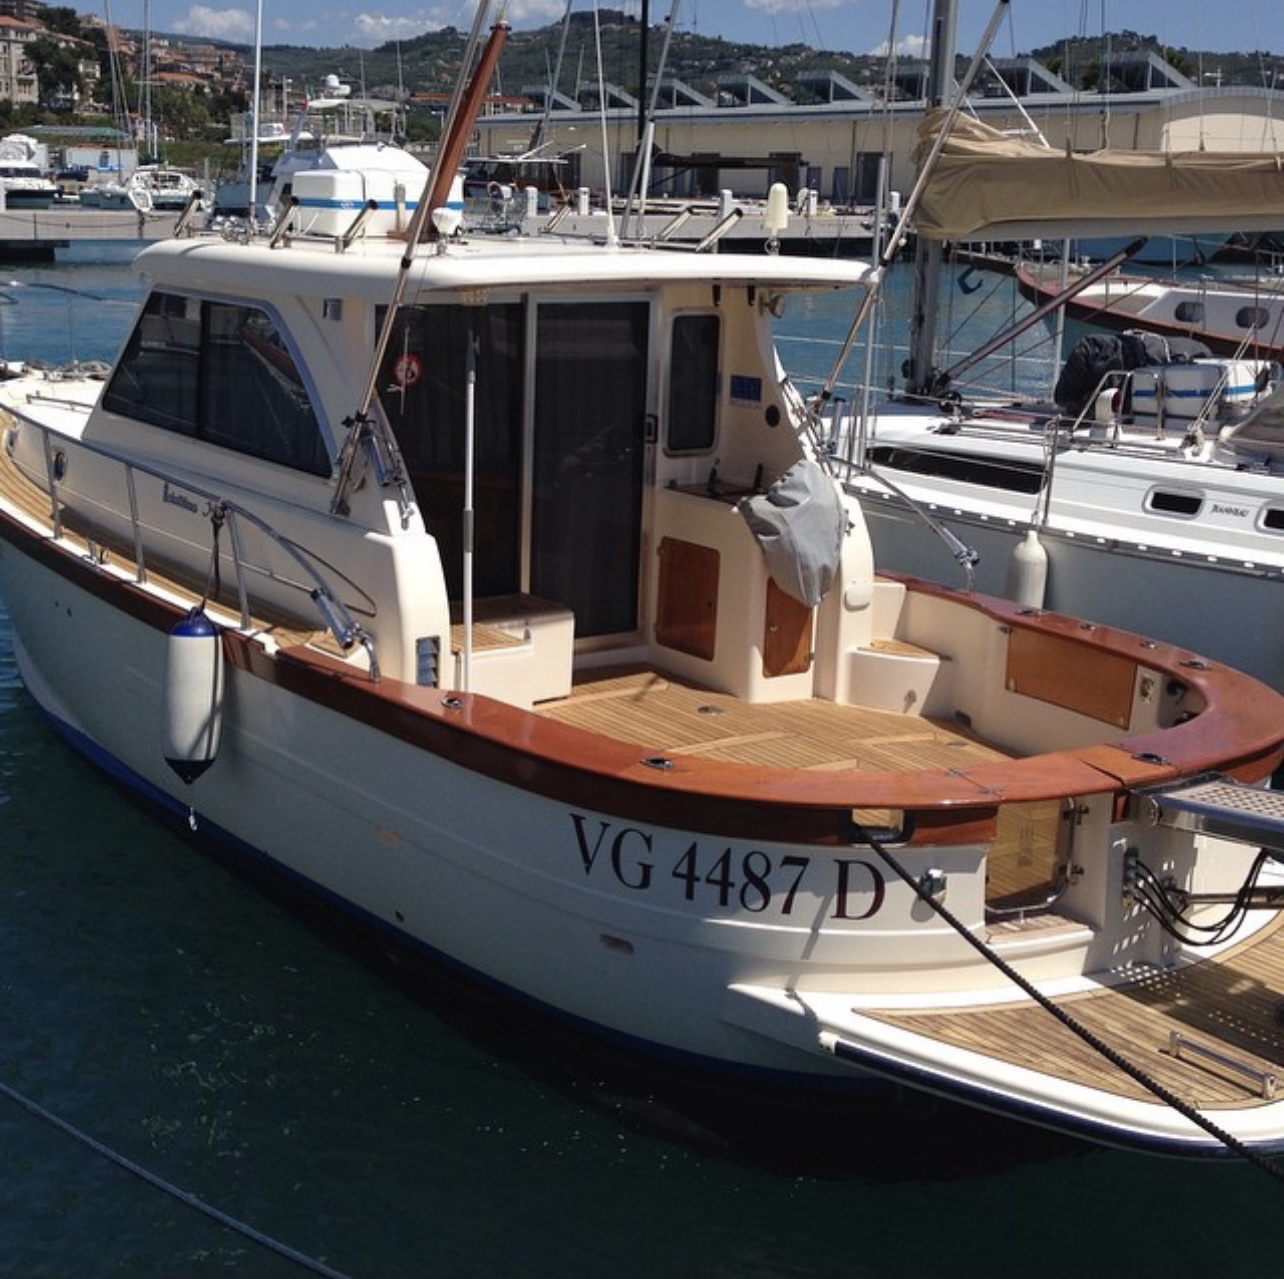 elite yachting solutions